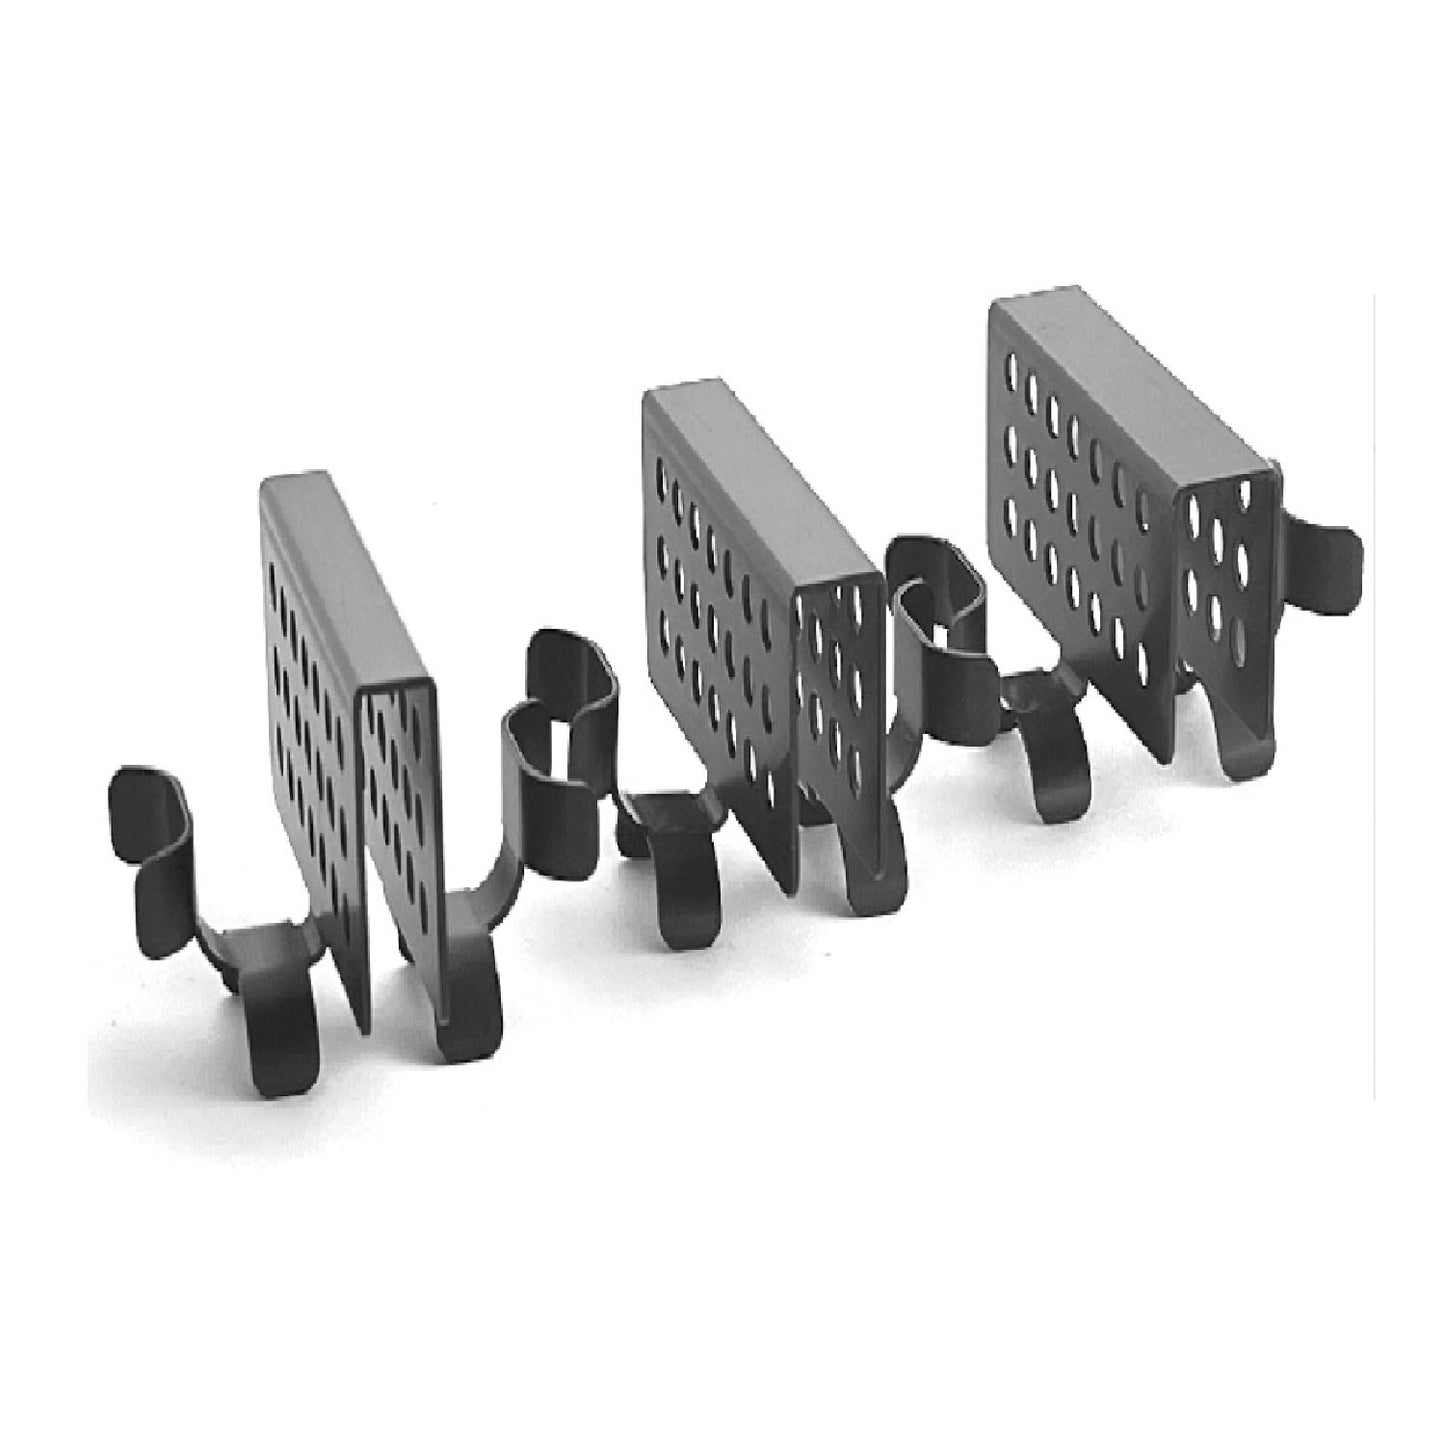 Standing seam saddle clip. Widths from 1/4" to 5/8". (10 pack)